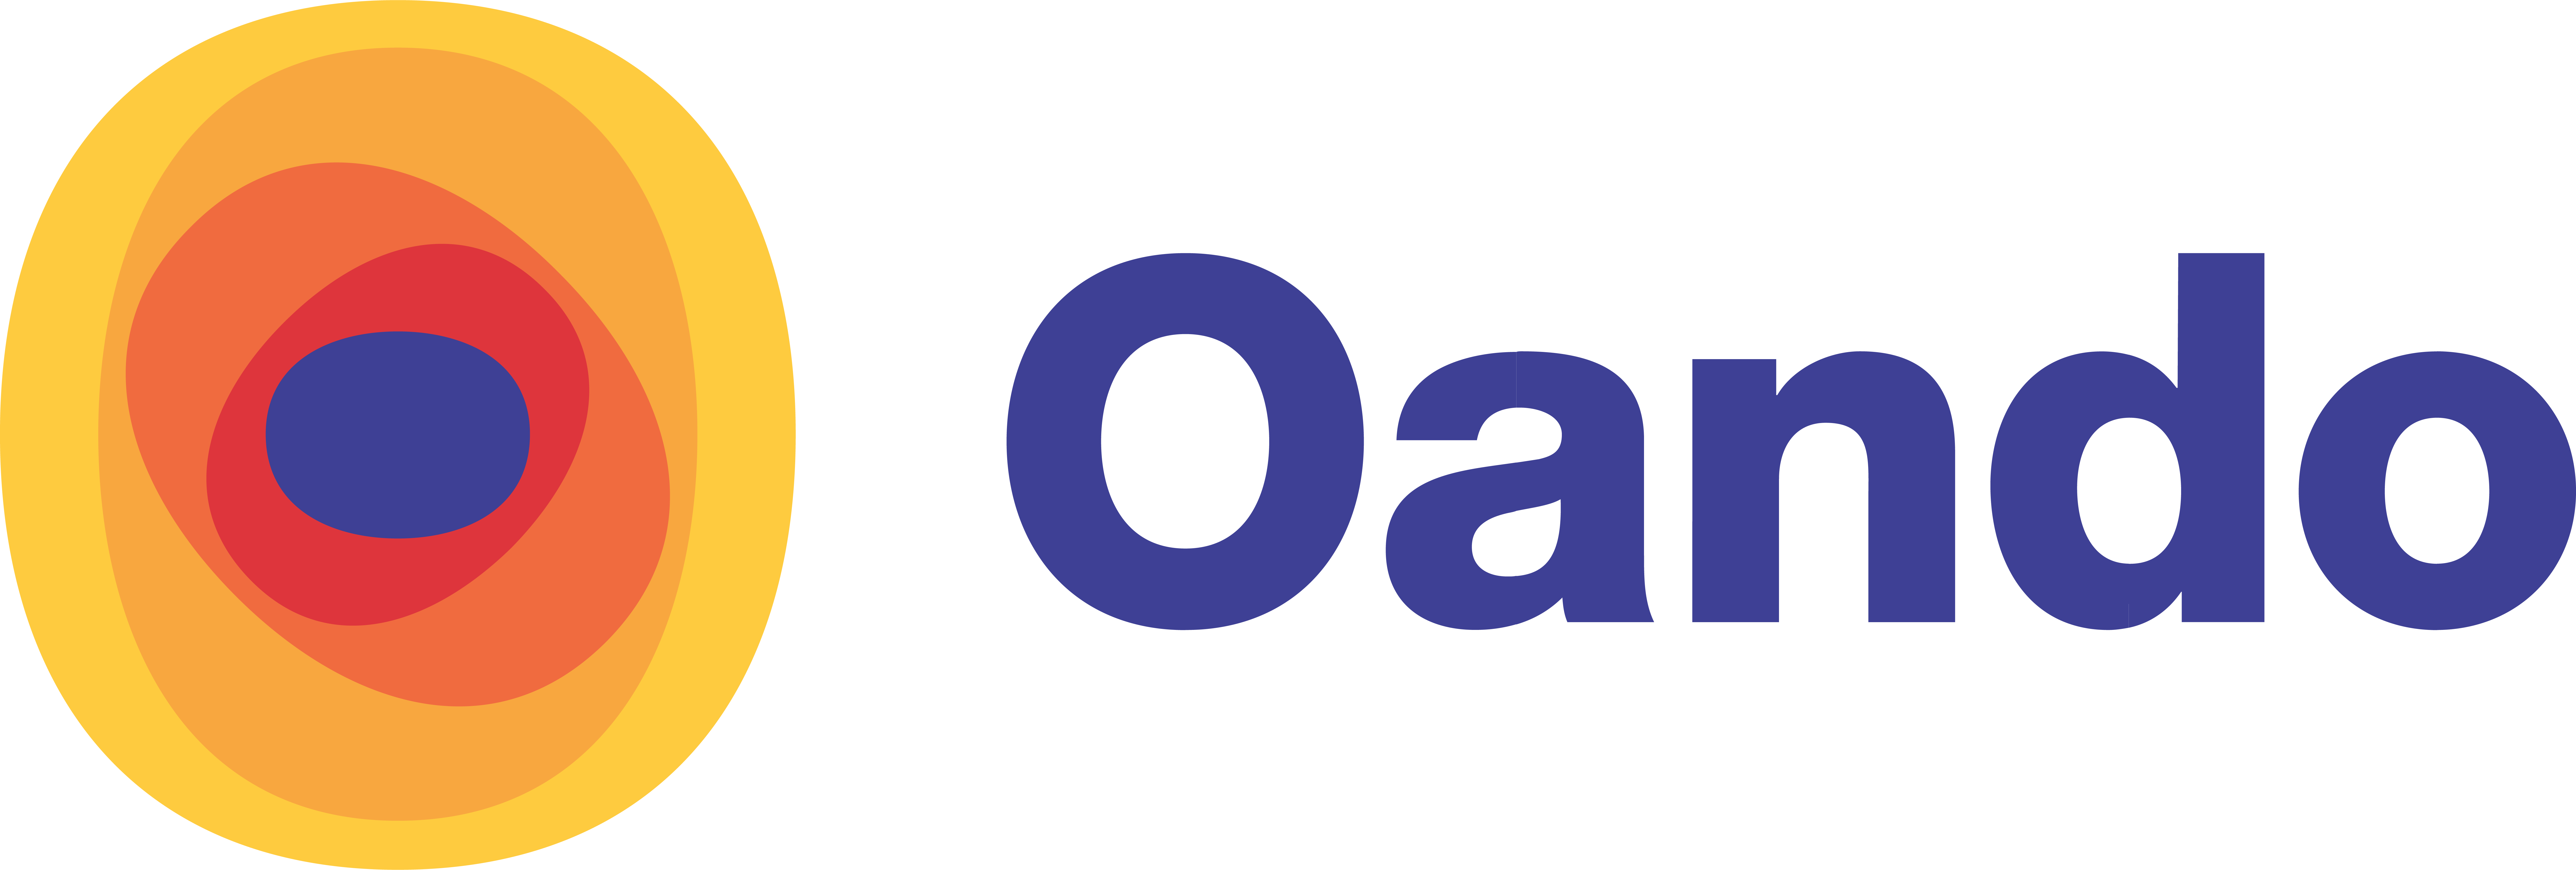 OANDO PLC ANNOUNCES FULL YEAR END 2019 RESULTS